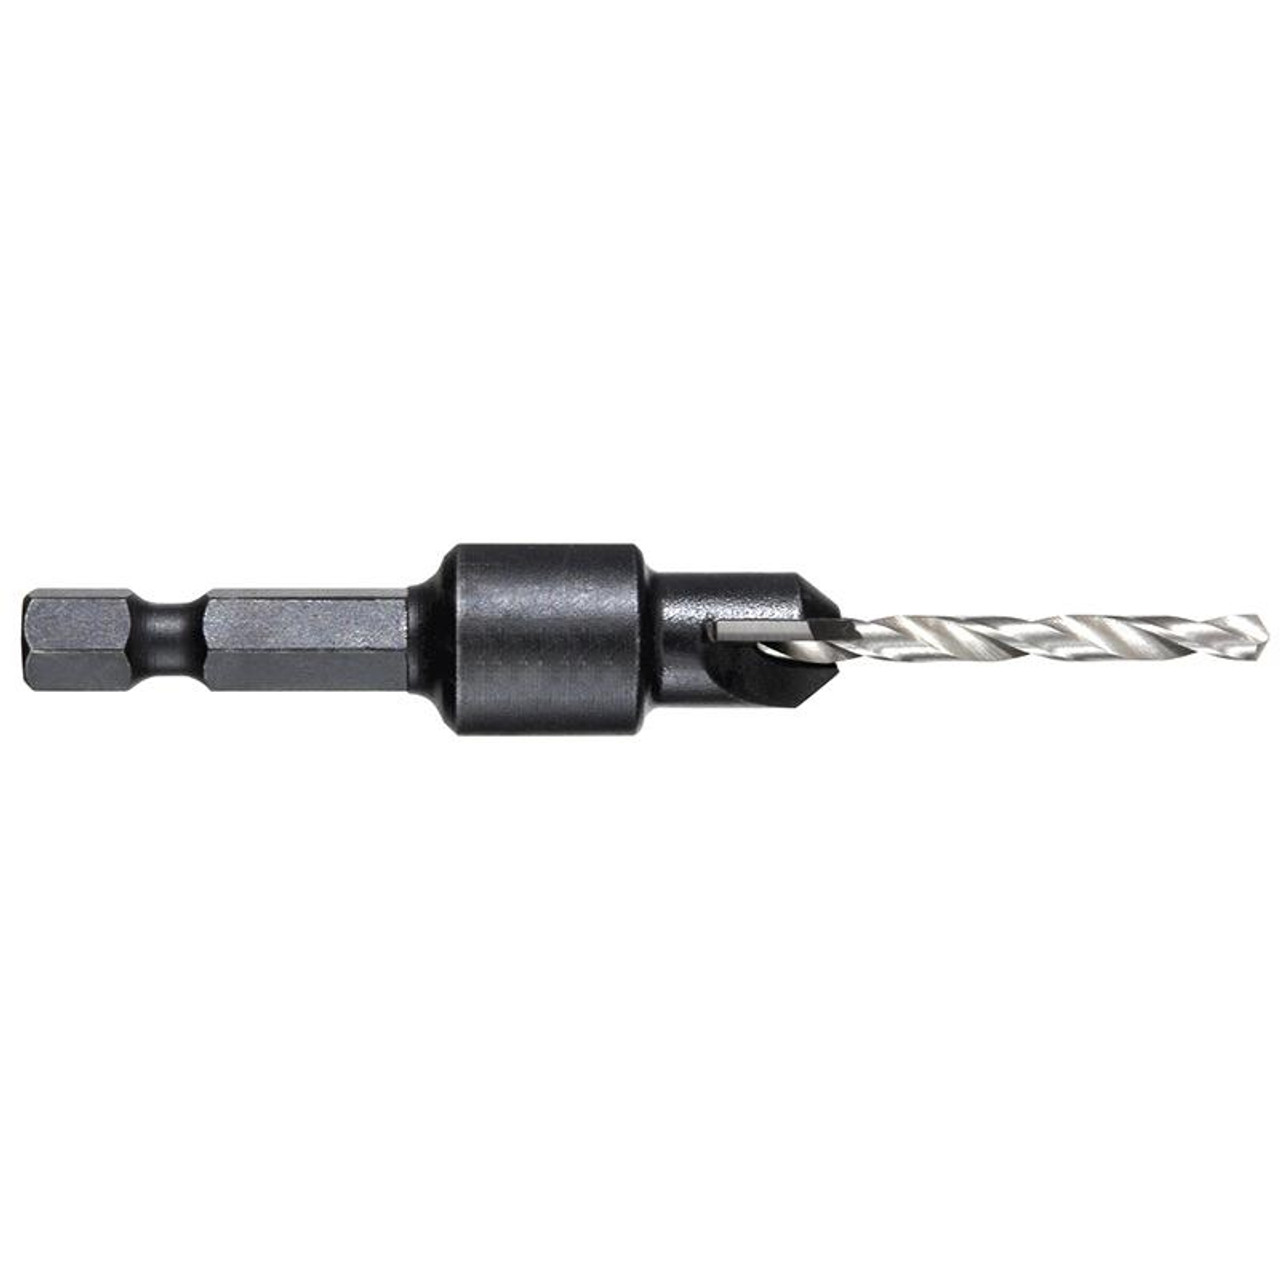 2.0Mm (5/64In) Tungsten Carbide Countersink With Drill Bit